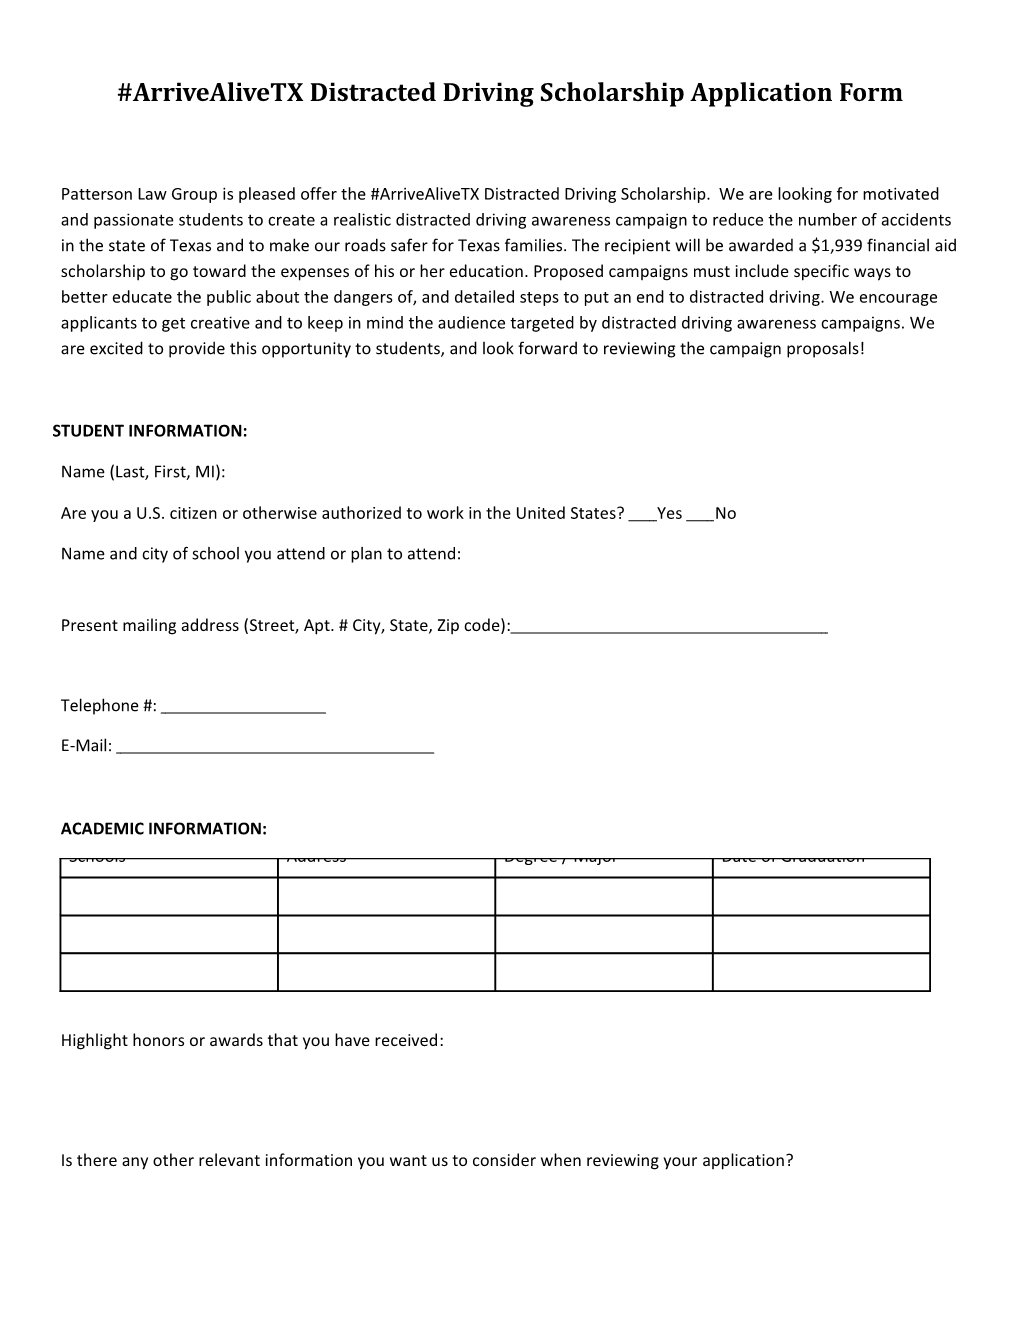 Arrivealivetx Distracted Driving Scholarship Application Form